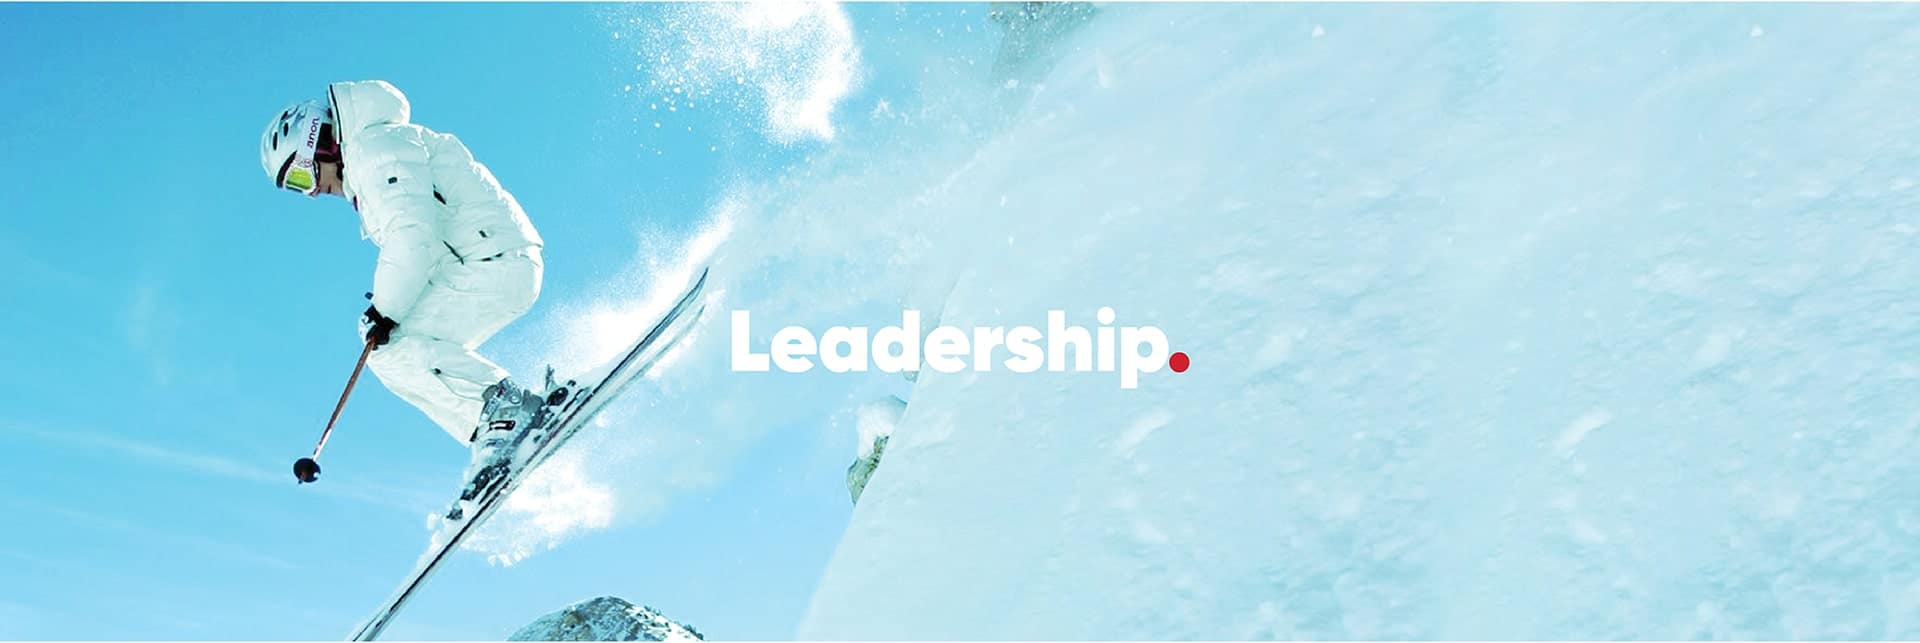 About - Leadership